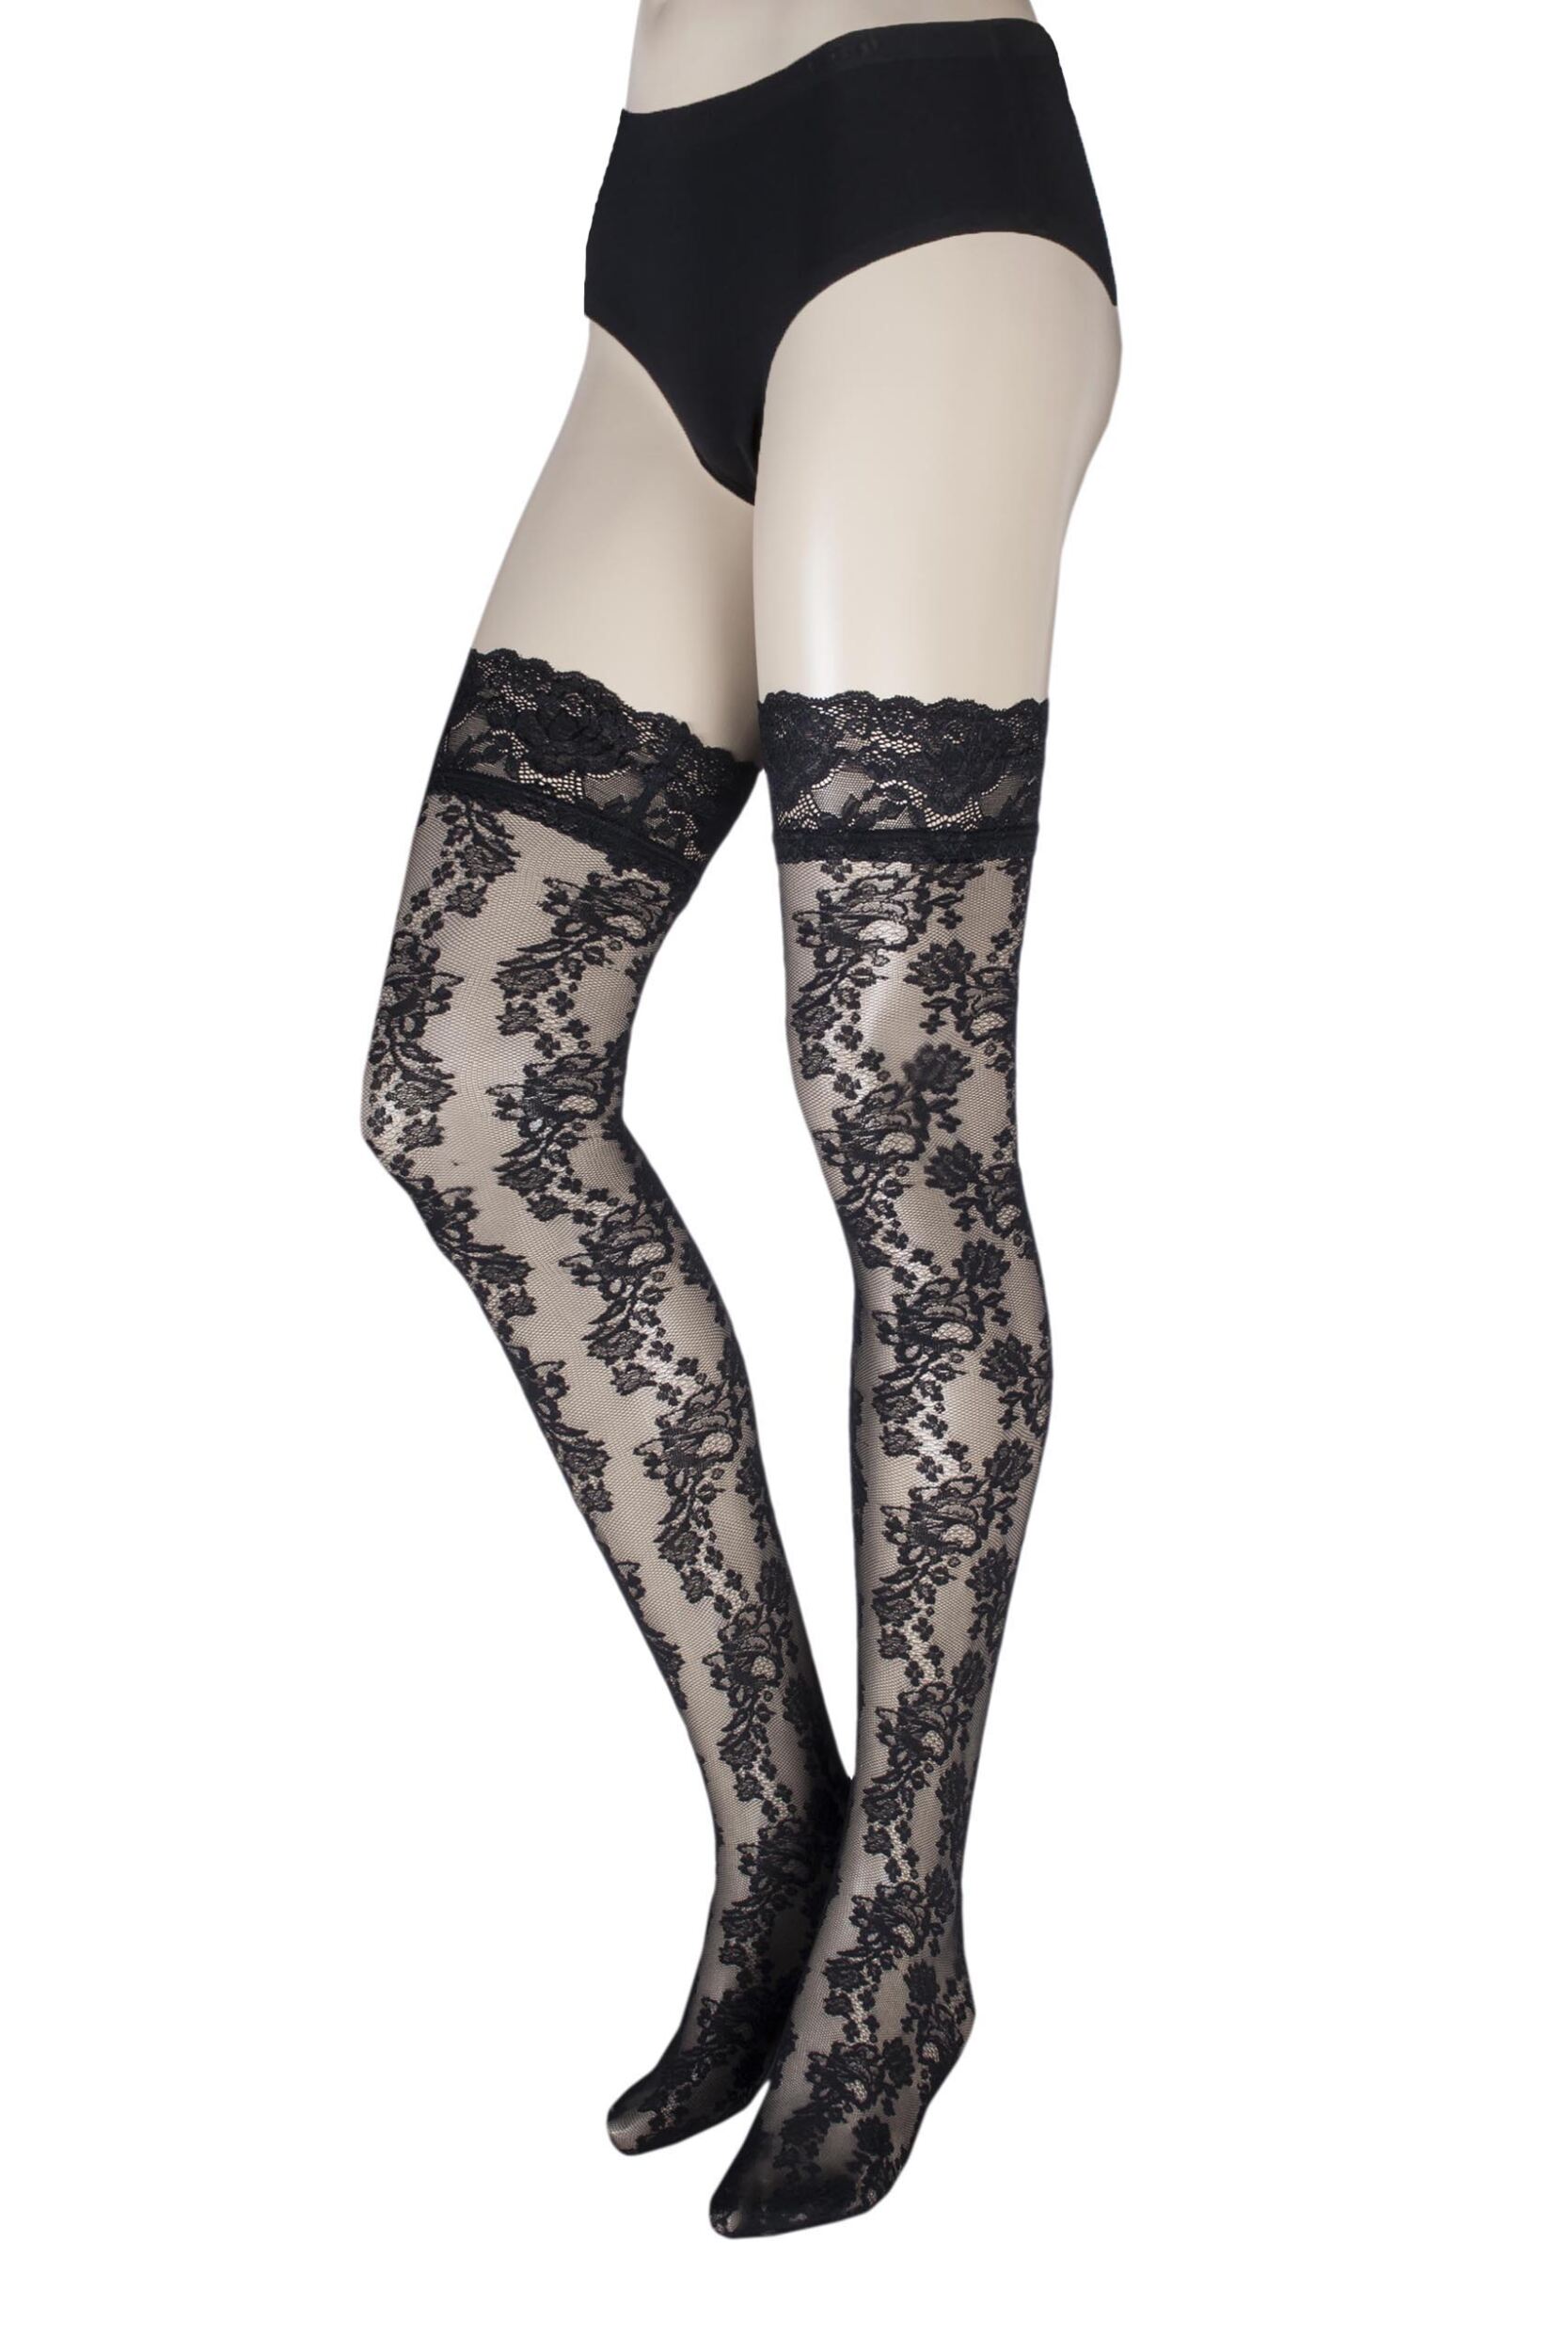 Image of Ladies 1 Pair Oroblu Sophia Floral Lace and Lace Top Hold Ups